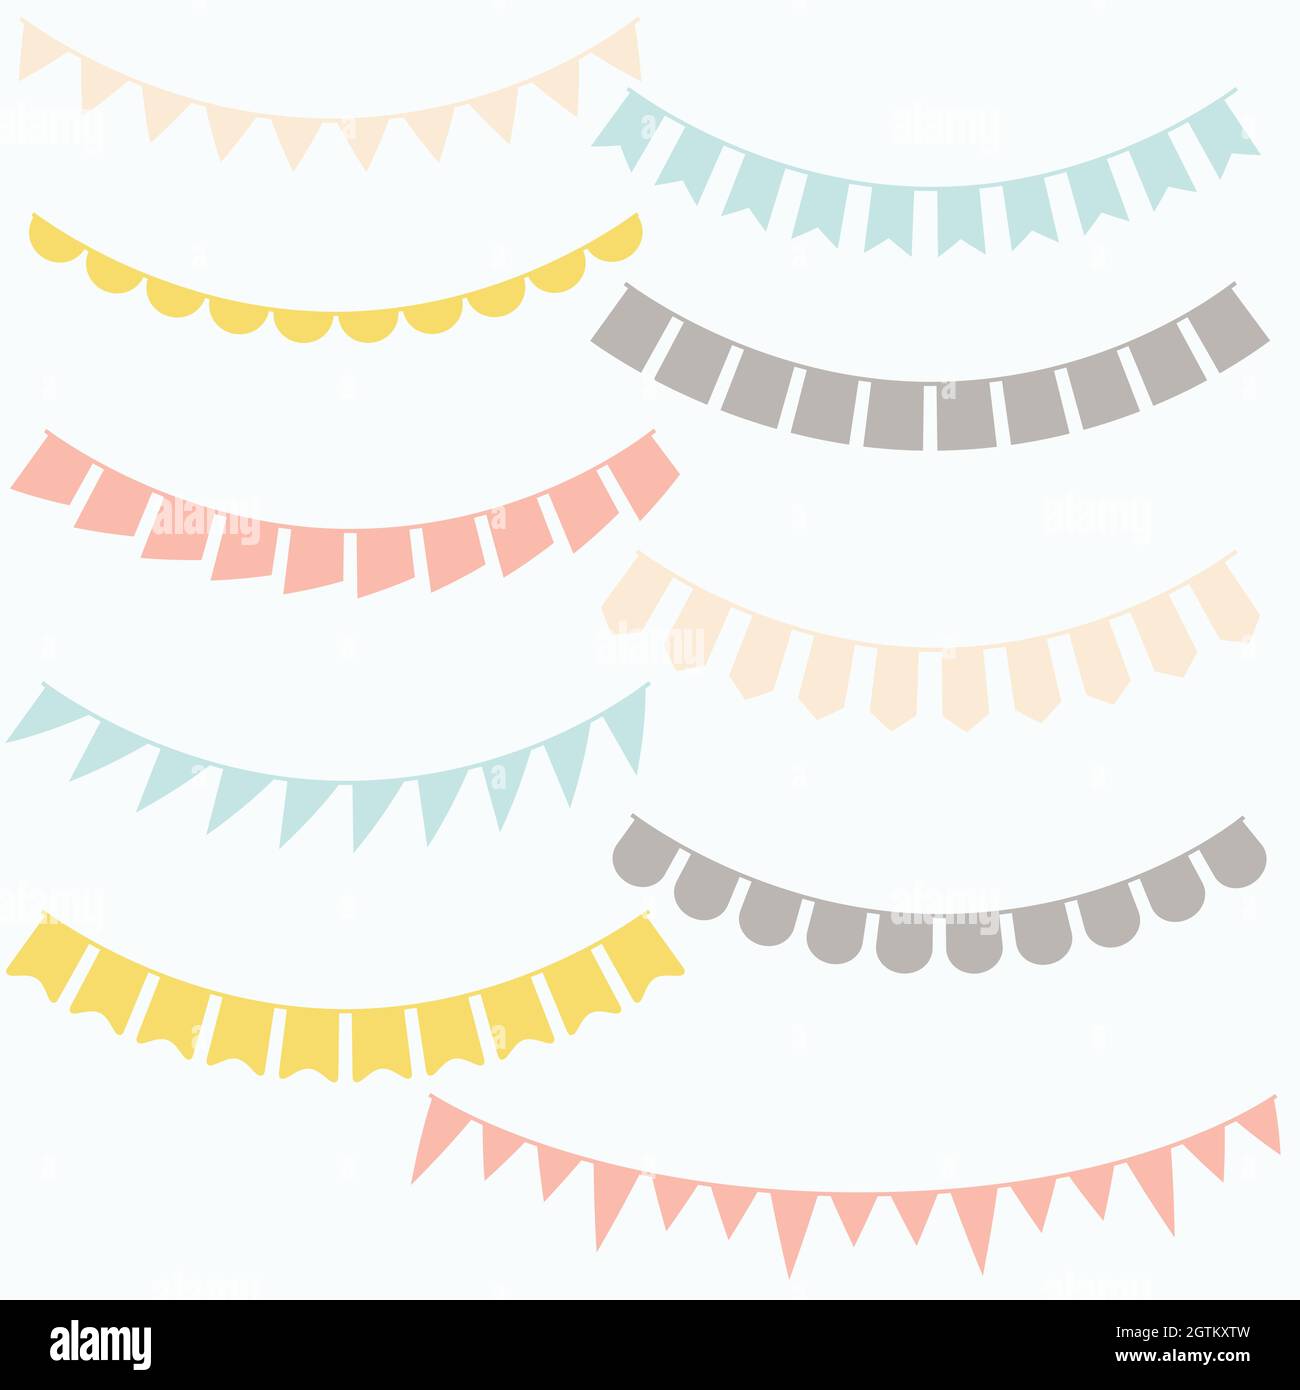 Colorful Bunting Banners. Hand Drawn Triangular Garland. Colored Silhouette. Stock Vector